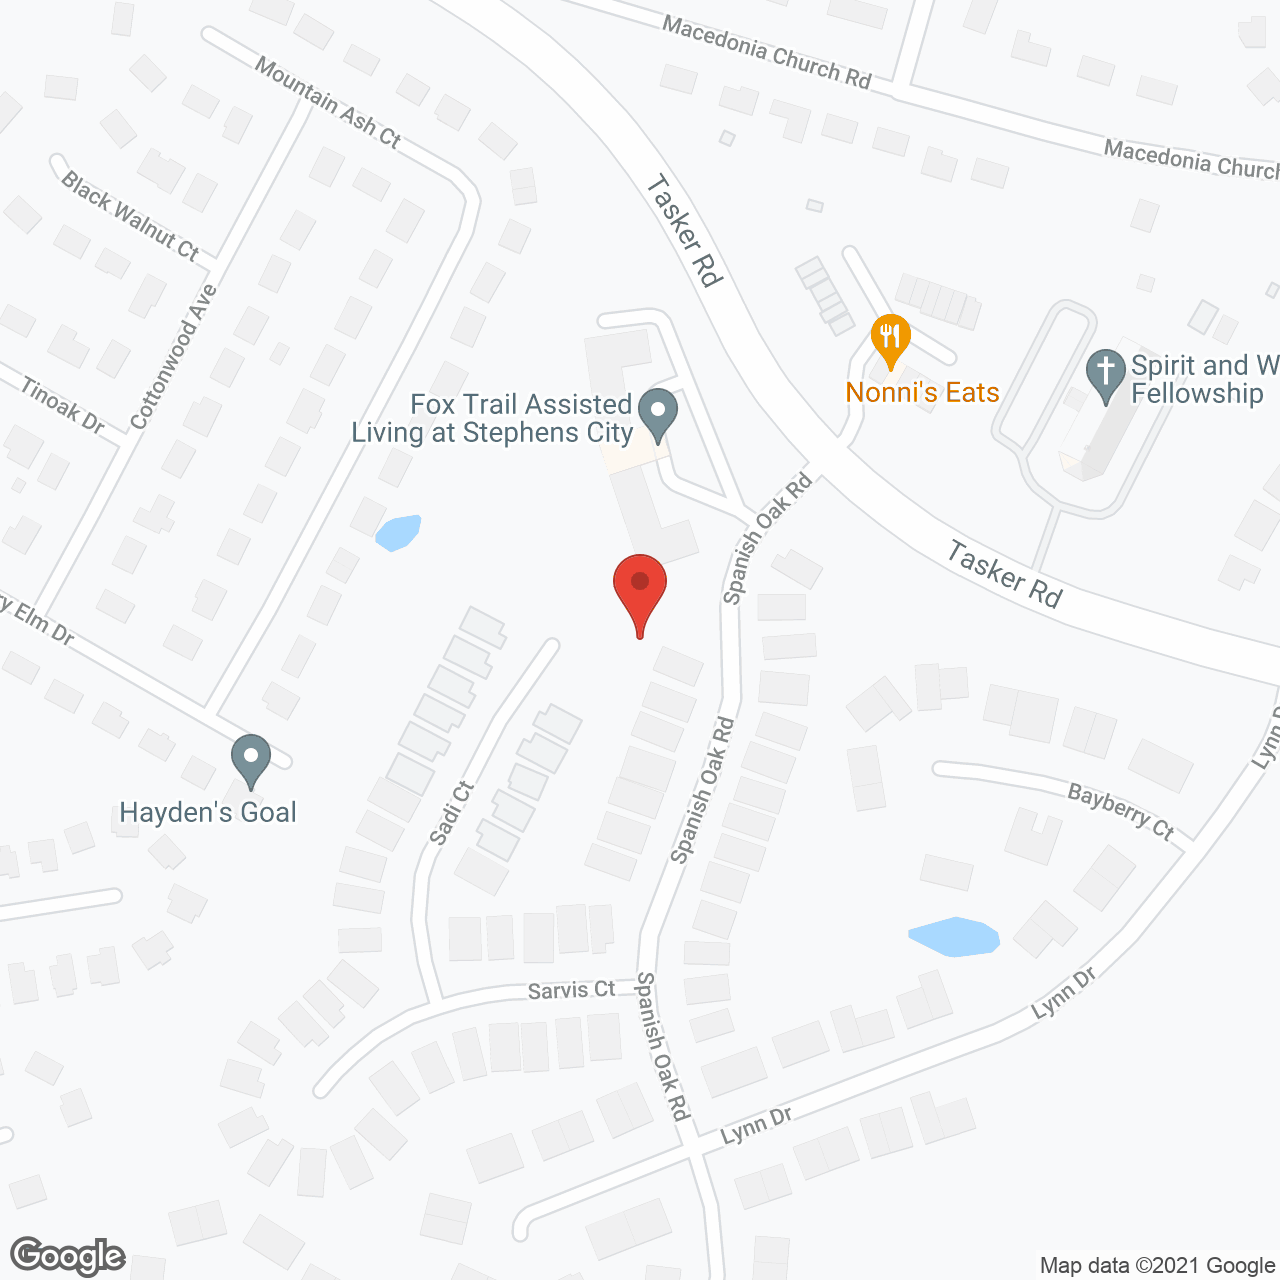 Fox Trail Assisted Living at Stephens City in google map